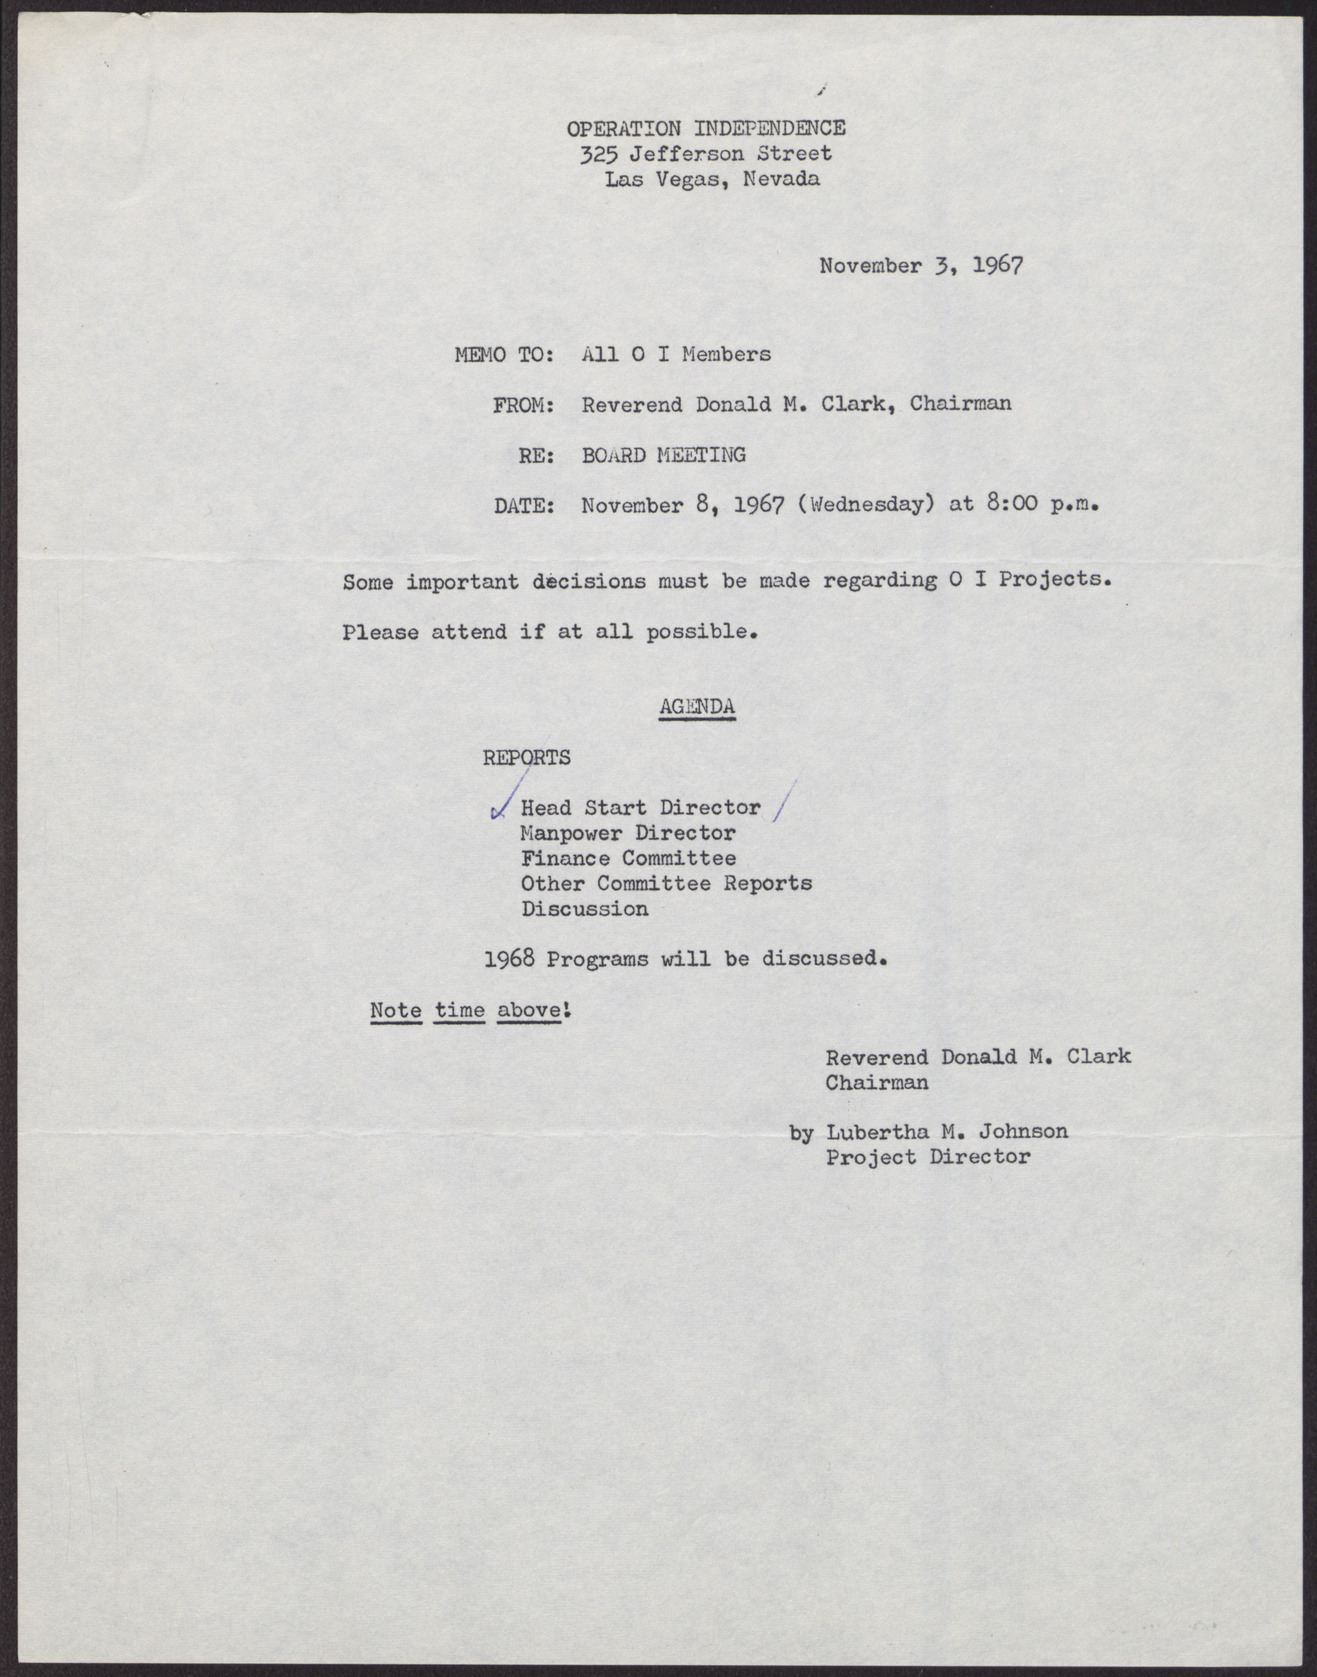 Letter to all Operation Independence Members from Reverend Donald M. Clark, November 3, 1967